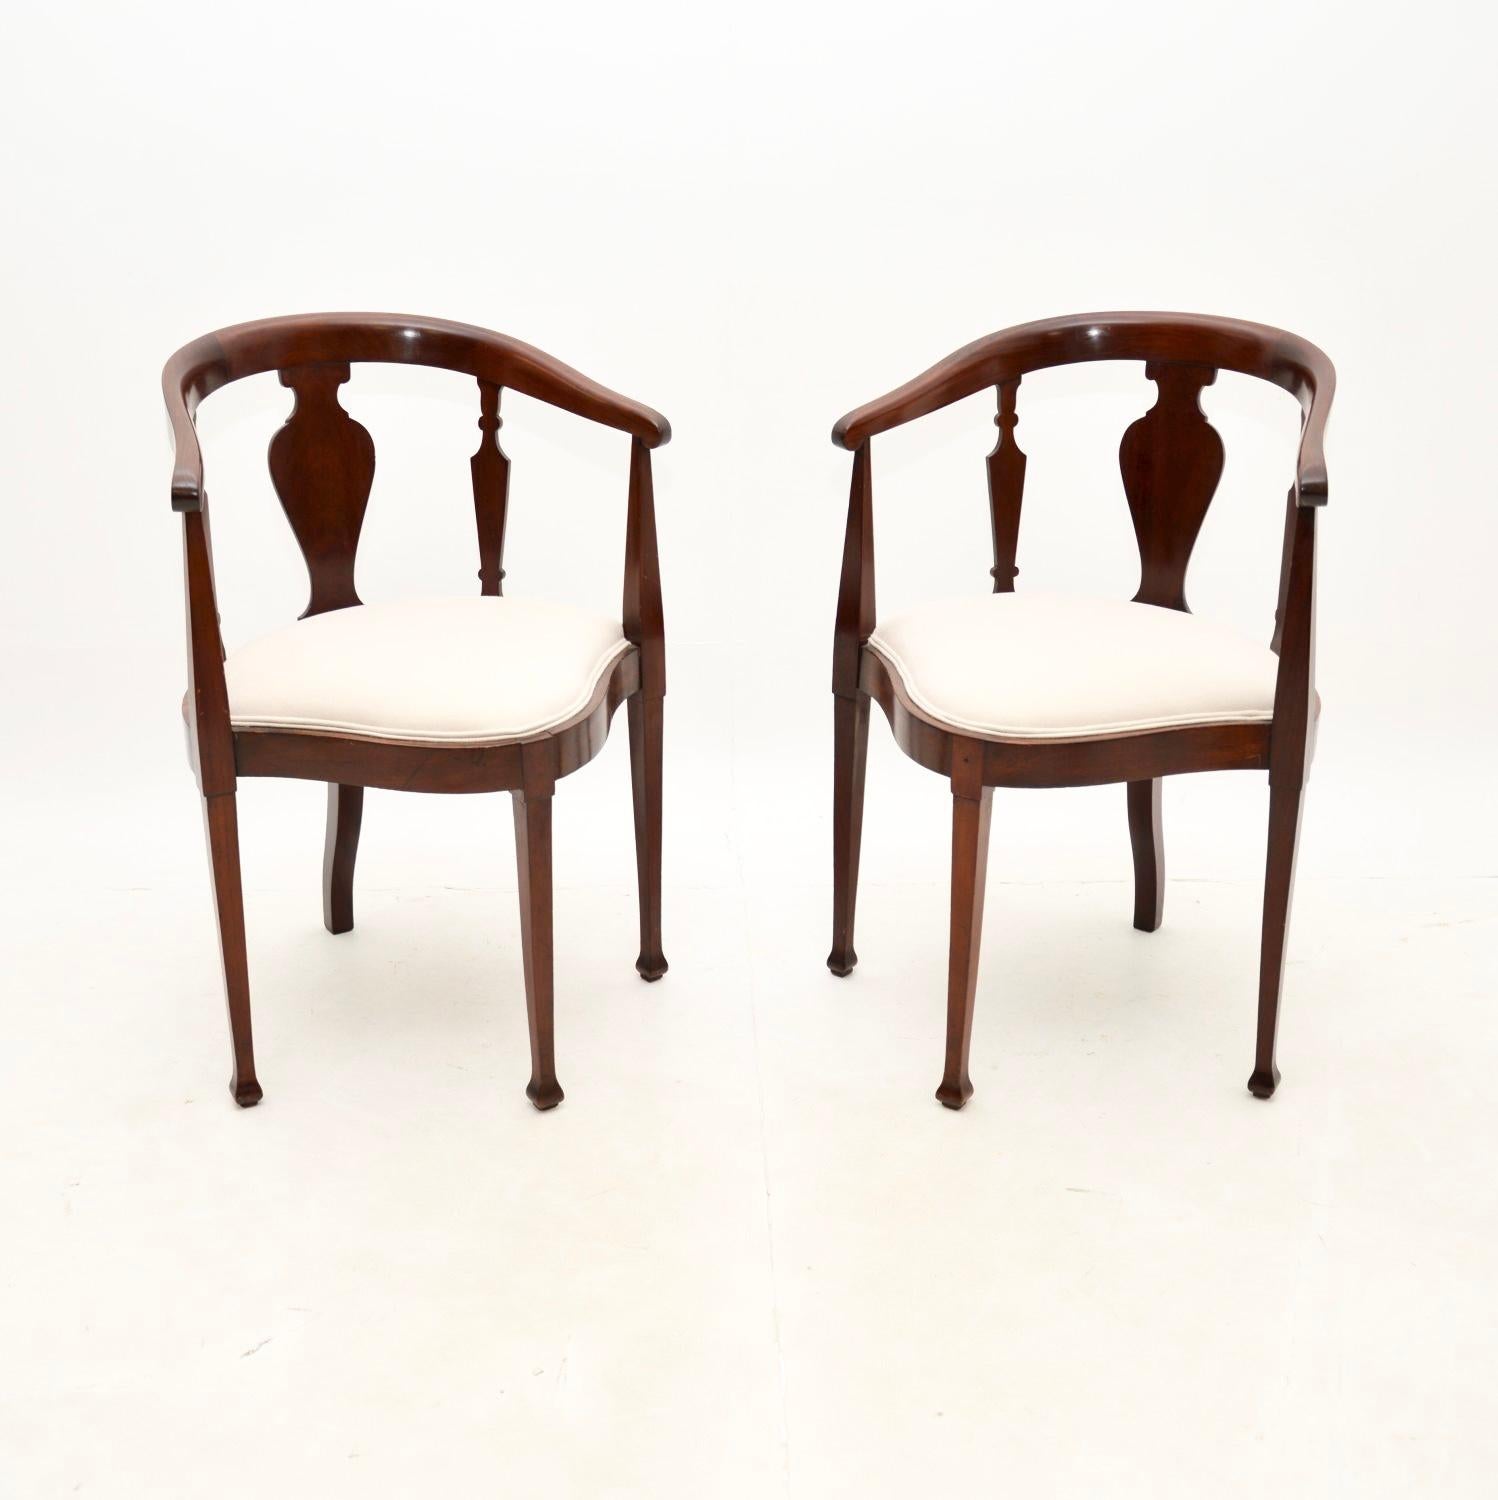 A fantastic pair of antique Edwardian corner chairs. They were made in England, they date from the 1900-1910 period.

They are of superb quality, with a fairly simple yet beautiful design. The frames have a wonderful shape, they sit on tapered legs